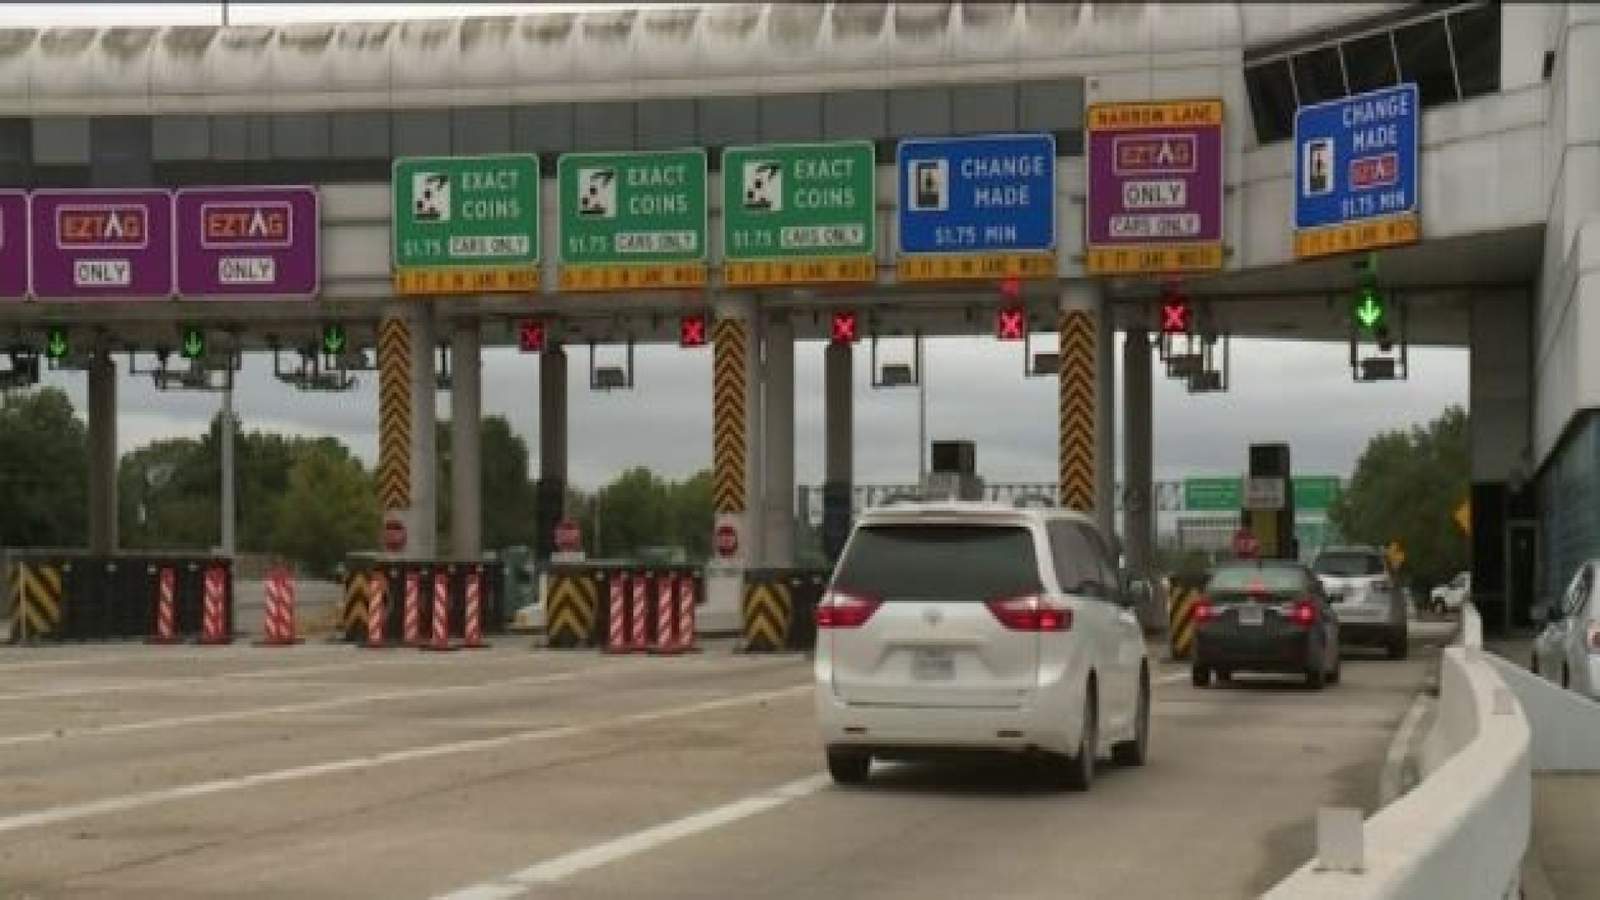 Here are easy toll road mistakes that can cost you money